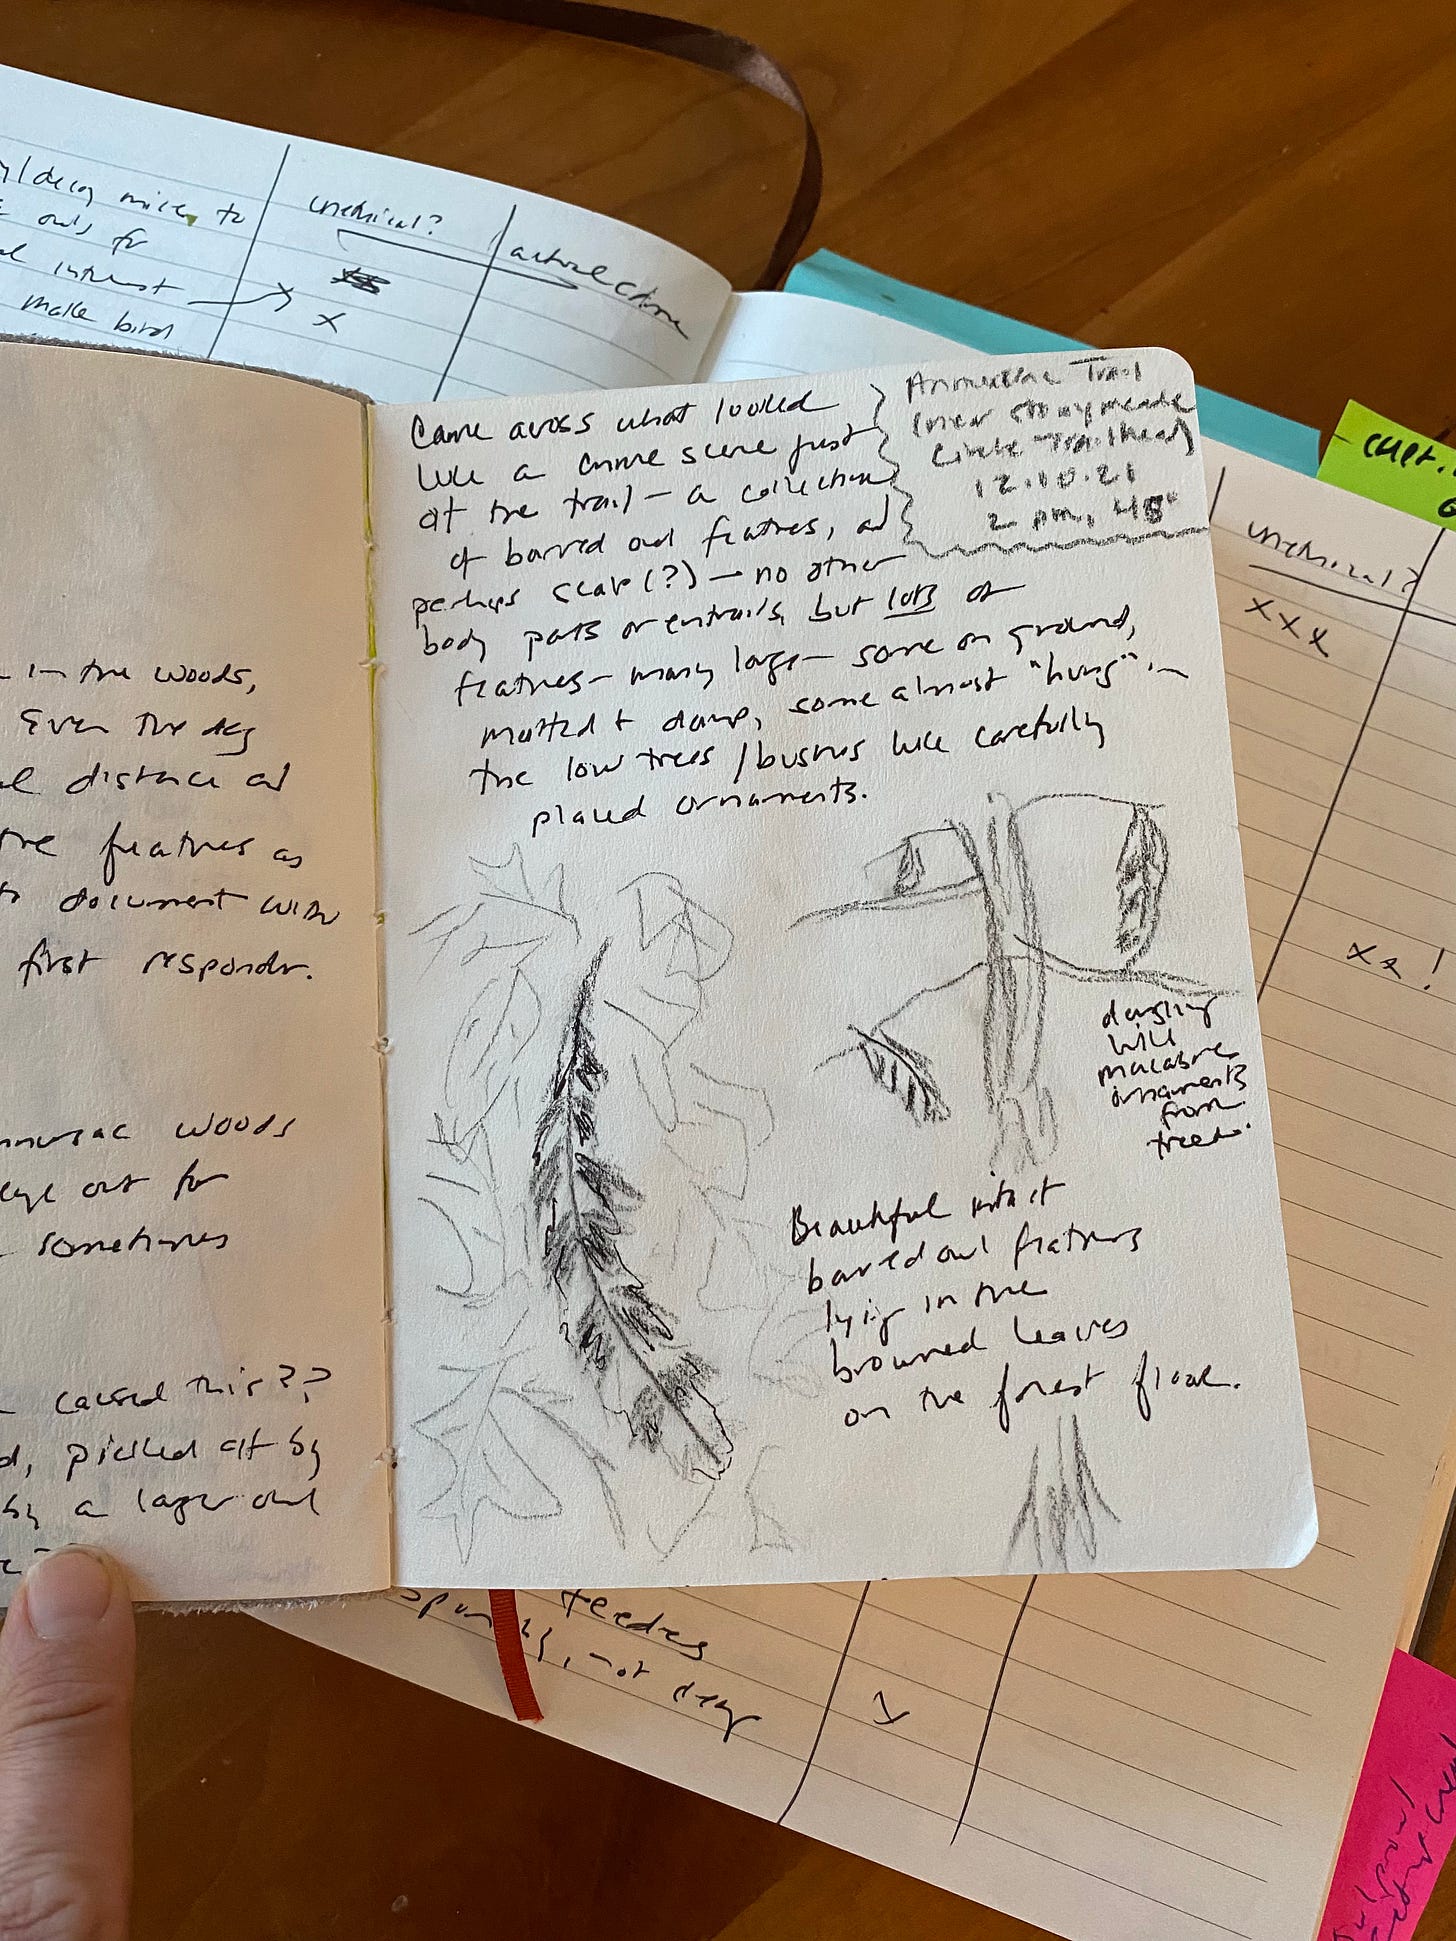 A page from a nature journal, showing barred owl feathers sketched in black and white, with questions and observations handwritten around them images